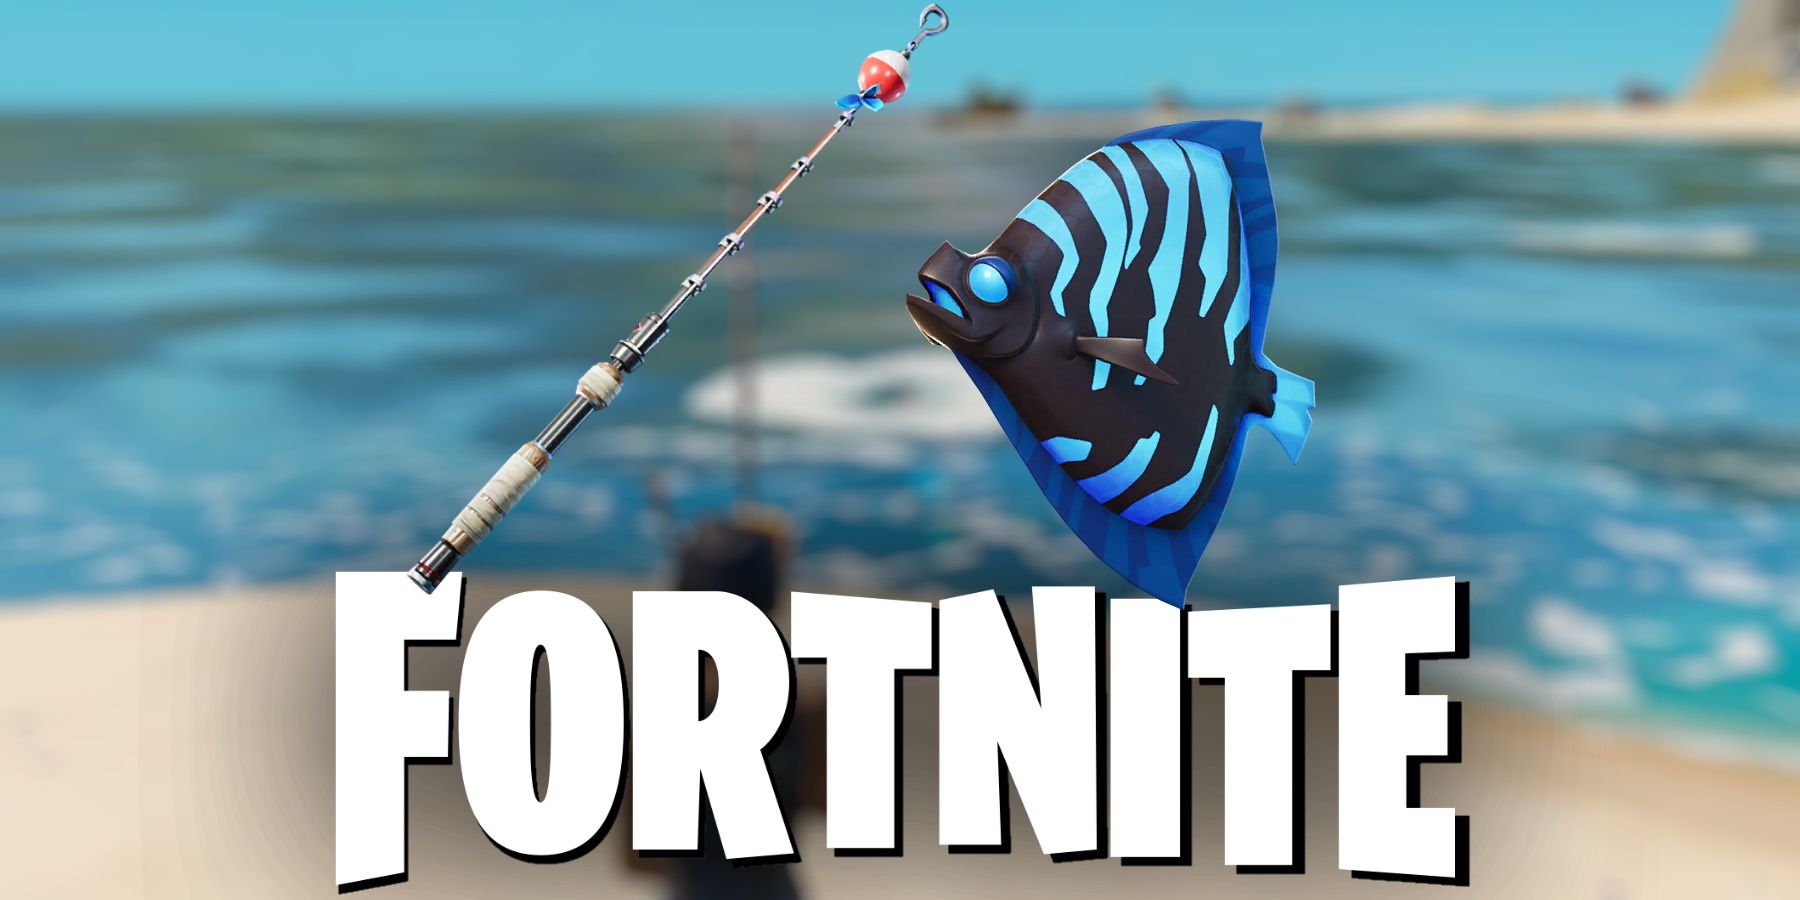 Fortnite fishing rod and black and blue shield fish on blurred fishing photo and official logo